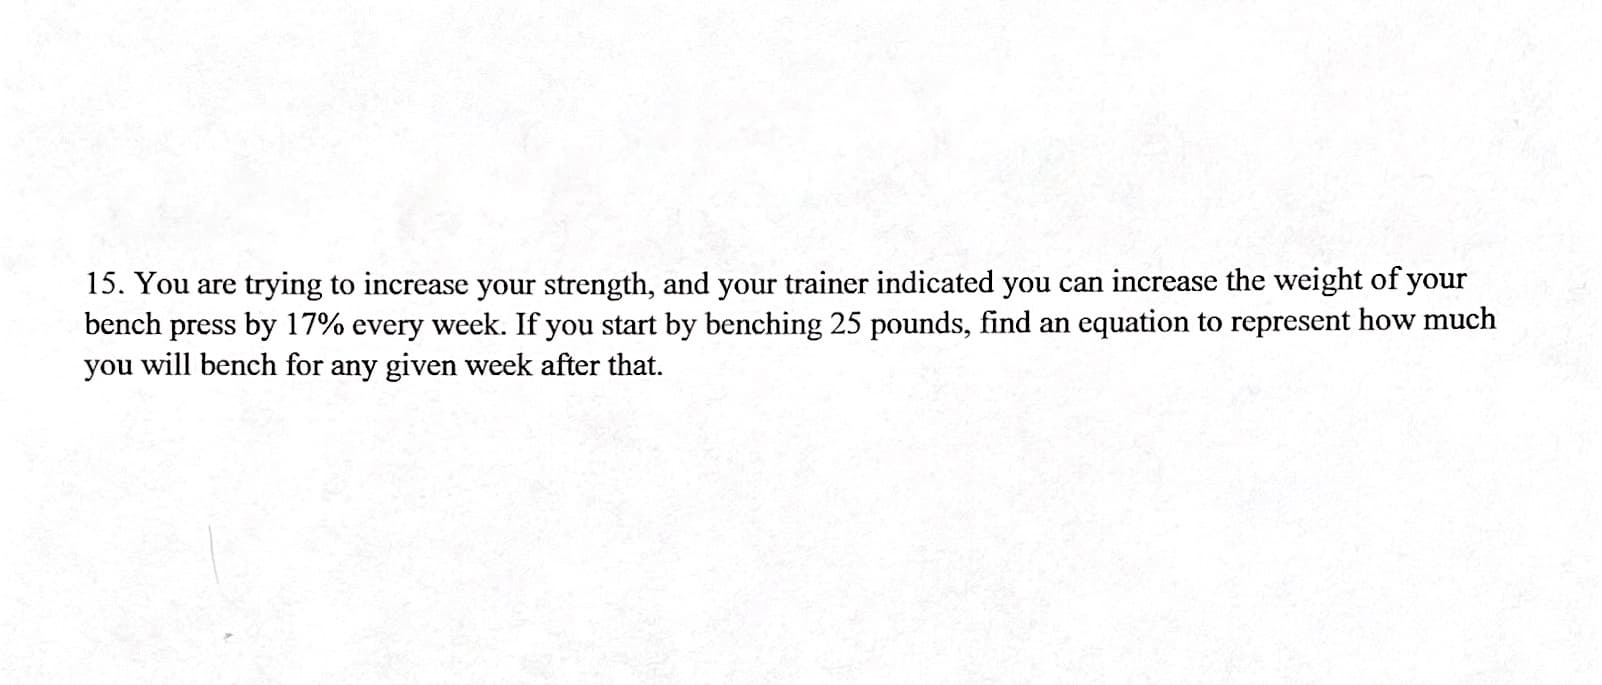 15. You are trying to increase your strength, and your trainer indicated you can increase the weight of your
bench press by 17% every week. If you start by benching 25 pounds, find an equation to represent how much
you will bench for any given week after that.
